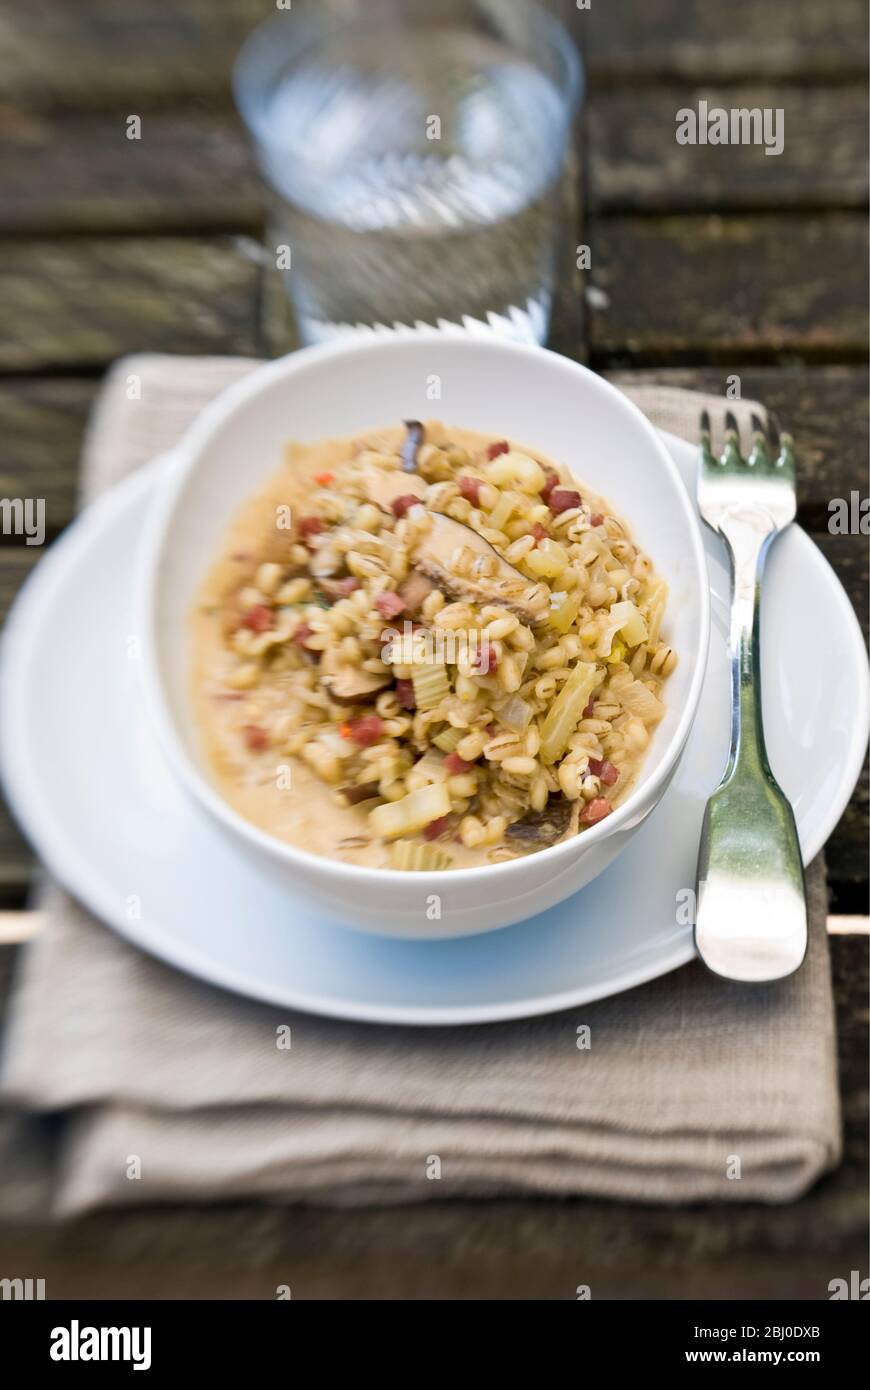 Barley risotto made with dried wild mushrooms, diced smoked ham, onions, celery and chicken stock, served in white porcelain bowl, outdoors Shot on le Stock Photo